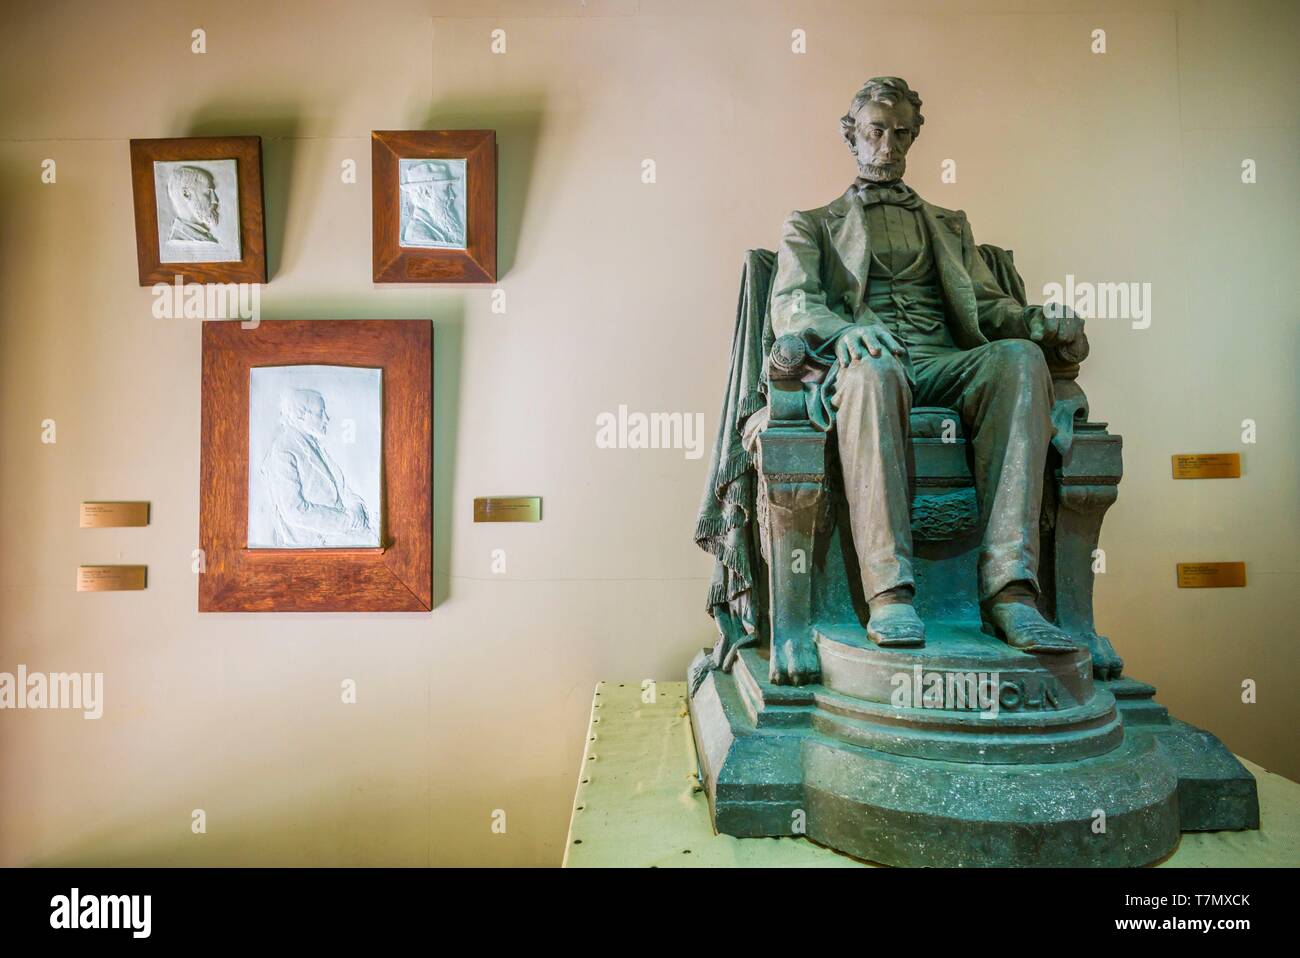 United States, New England, New Hampshire, Cornish, Saint-Gaudens National Historic Site, former home of 19th century sculptor, Augustus Saint-Gaudens, New Gallery, sculpture of Abraham Lincoln Stock Photo